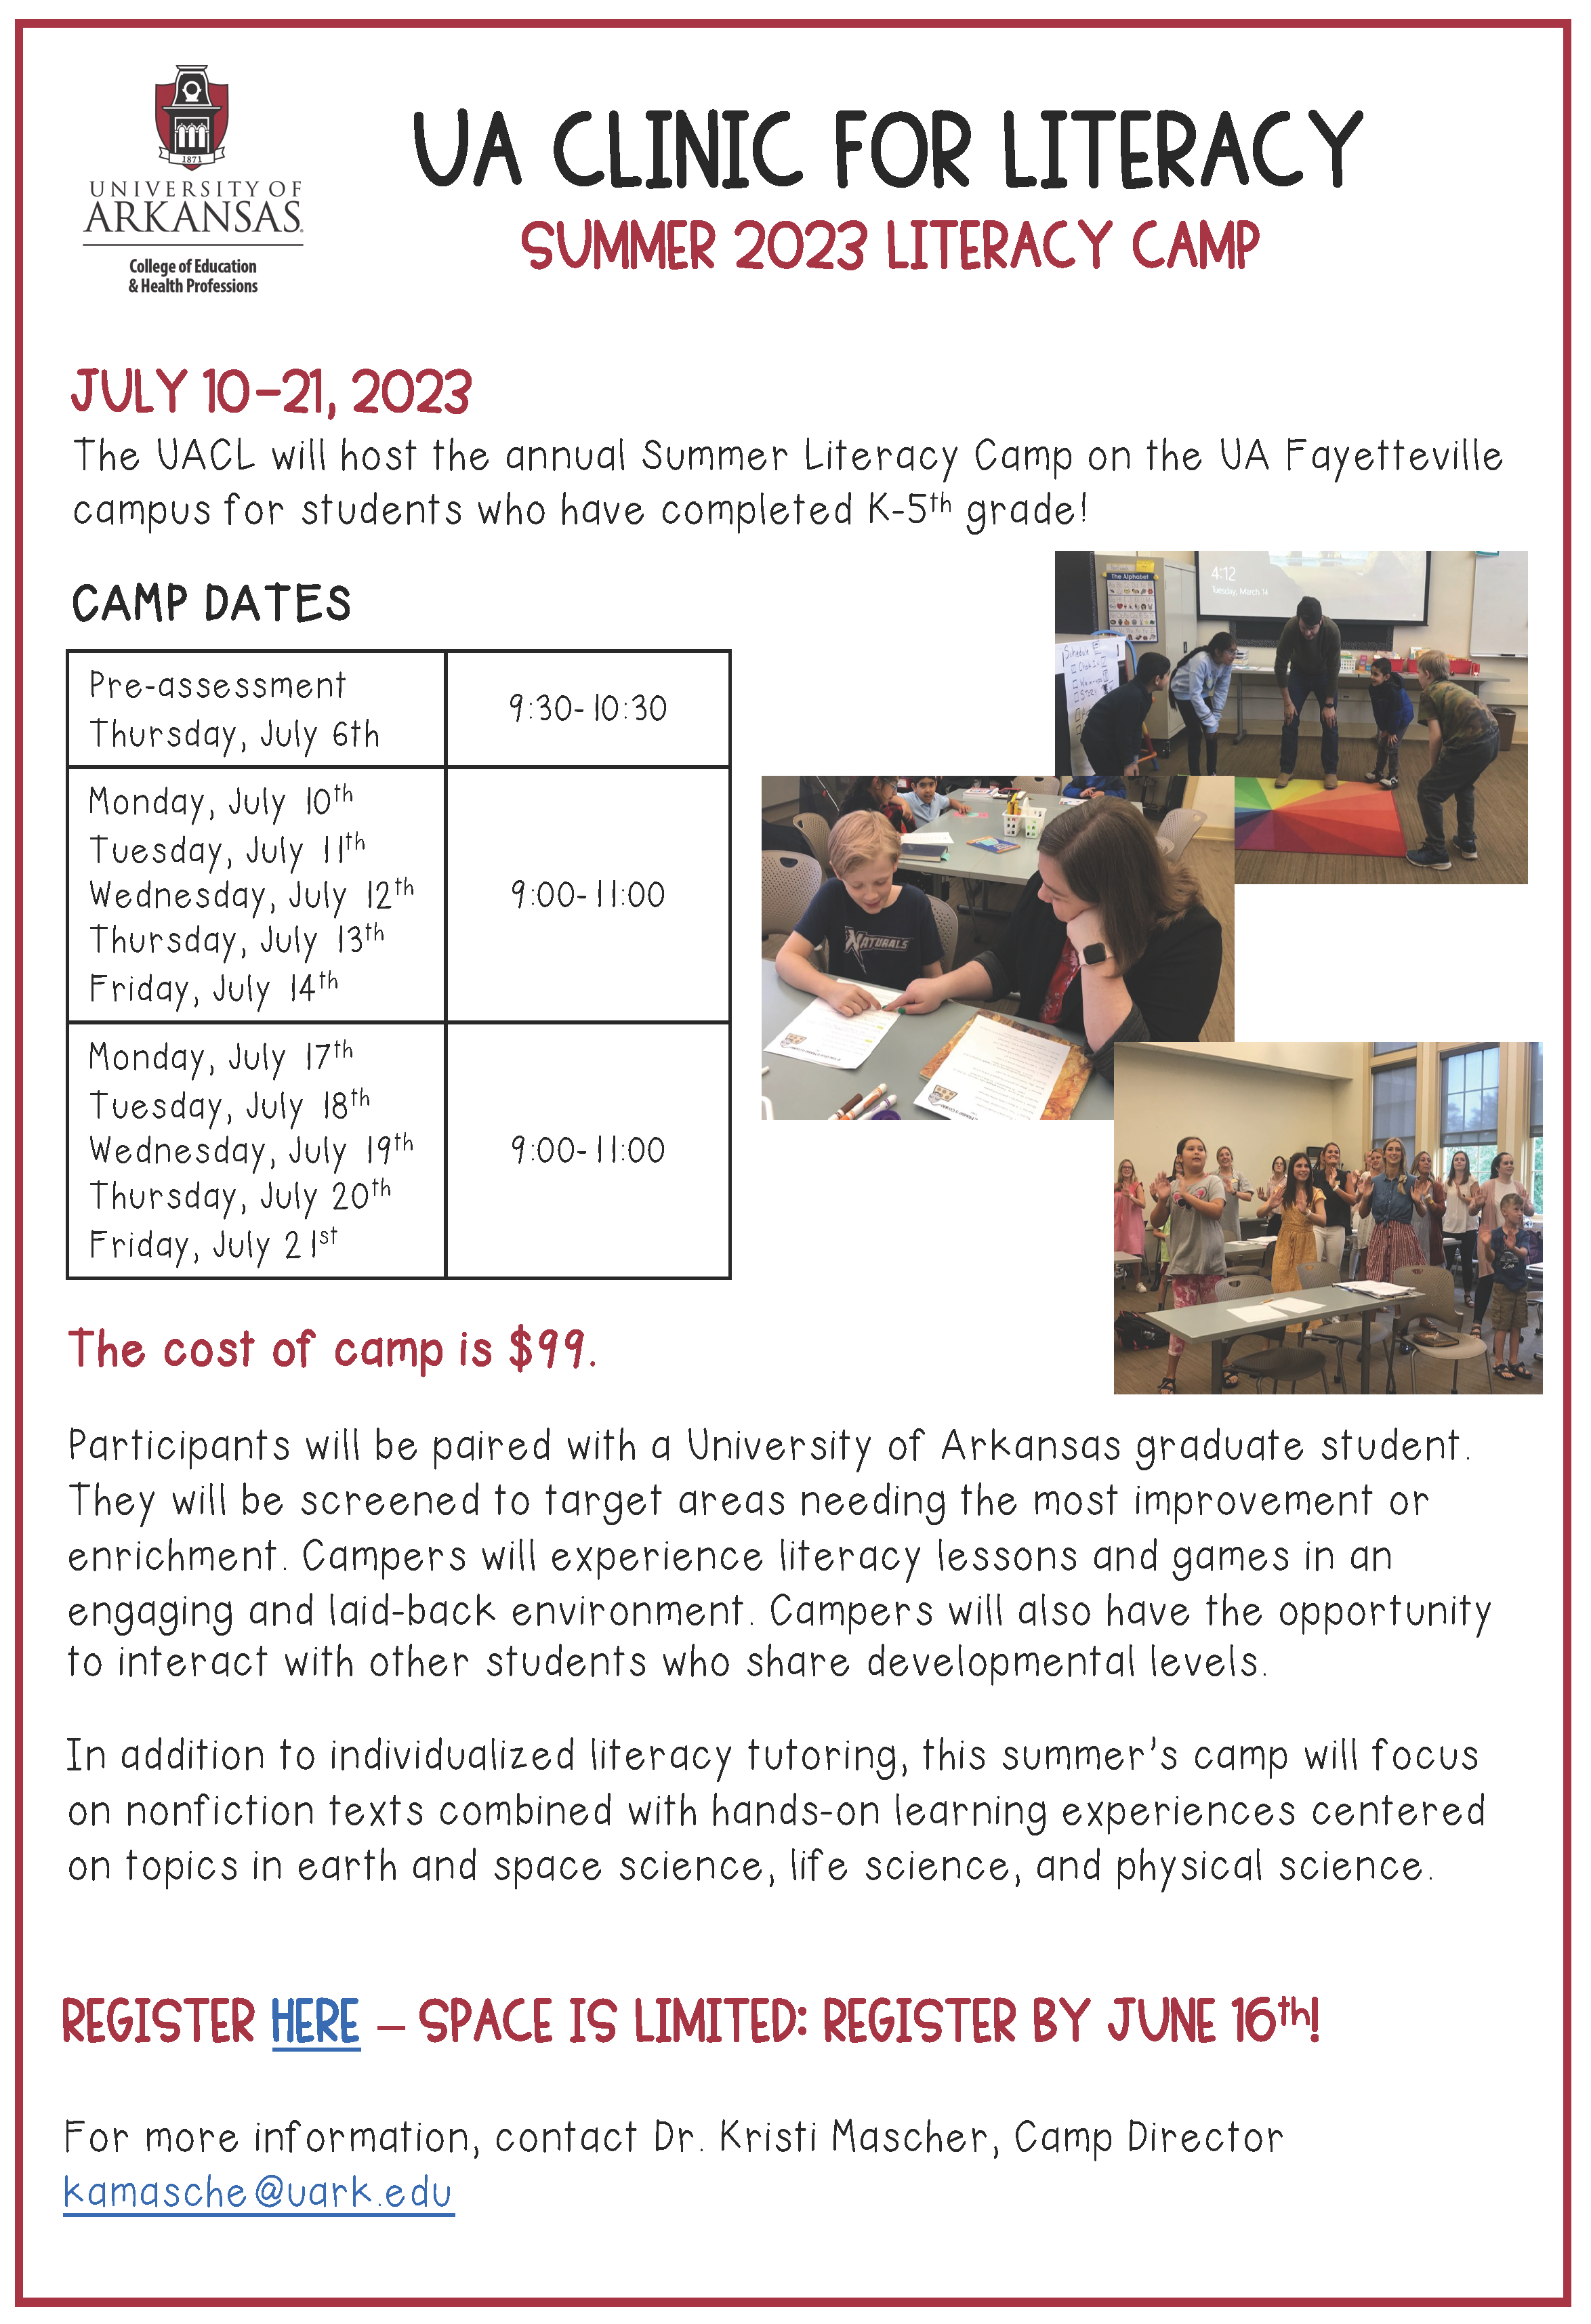 Page 2 of Summer 2023 Literacy Camp flyer